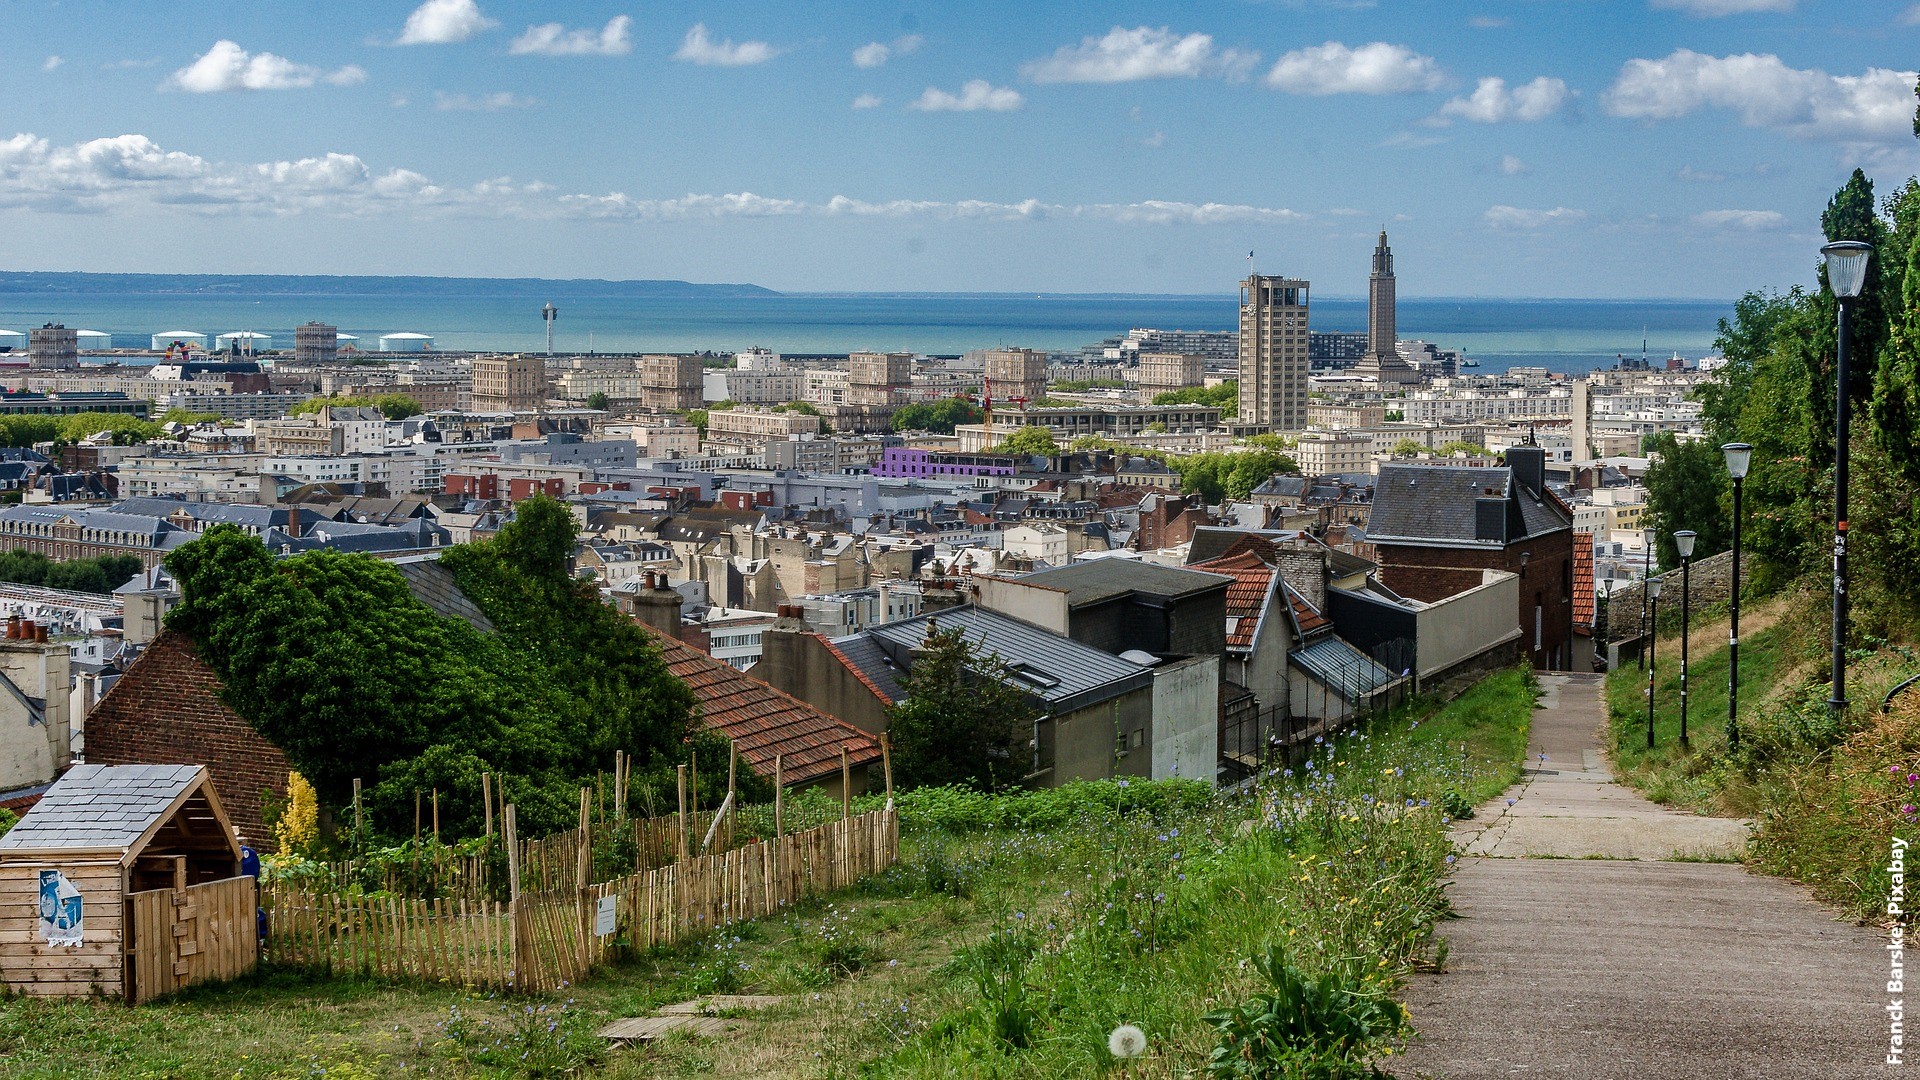 City of Le Havre